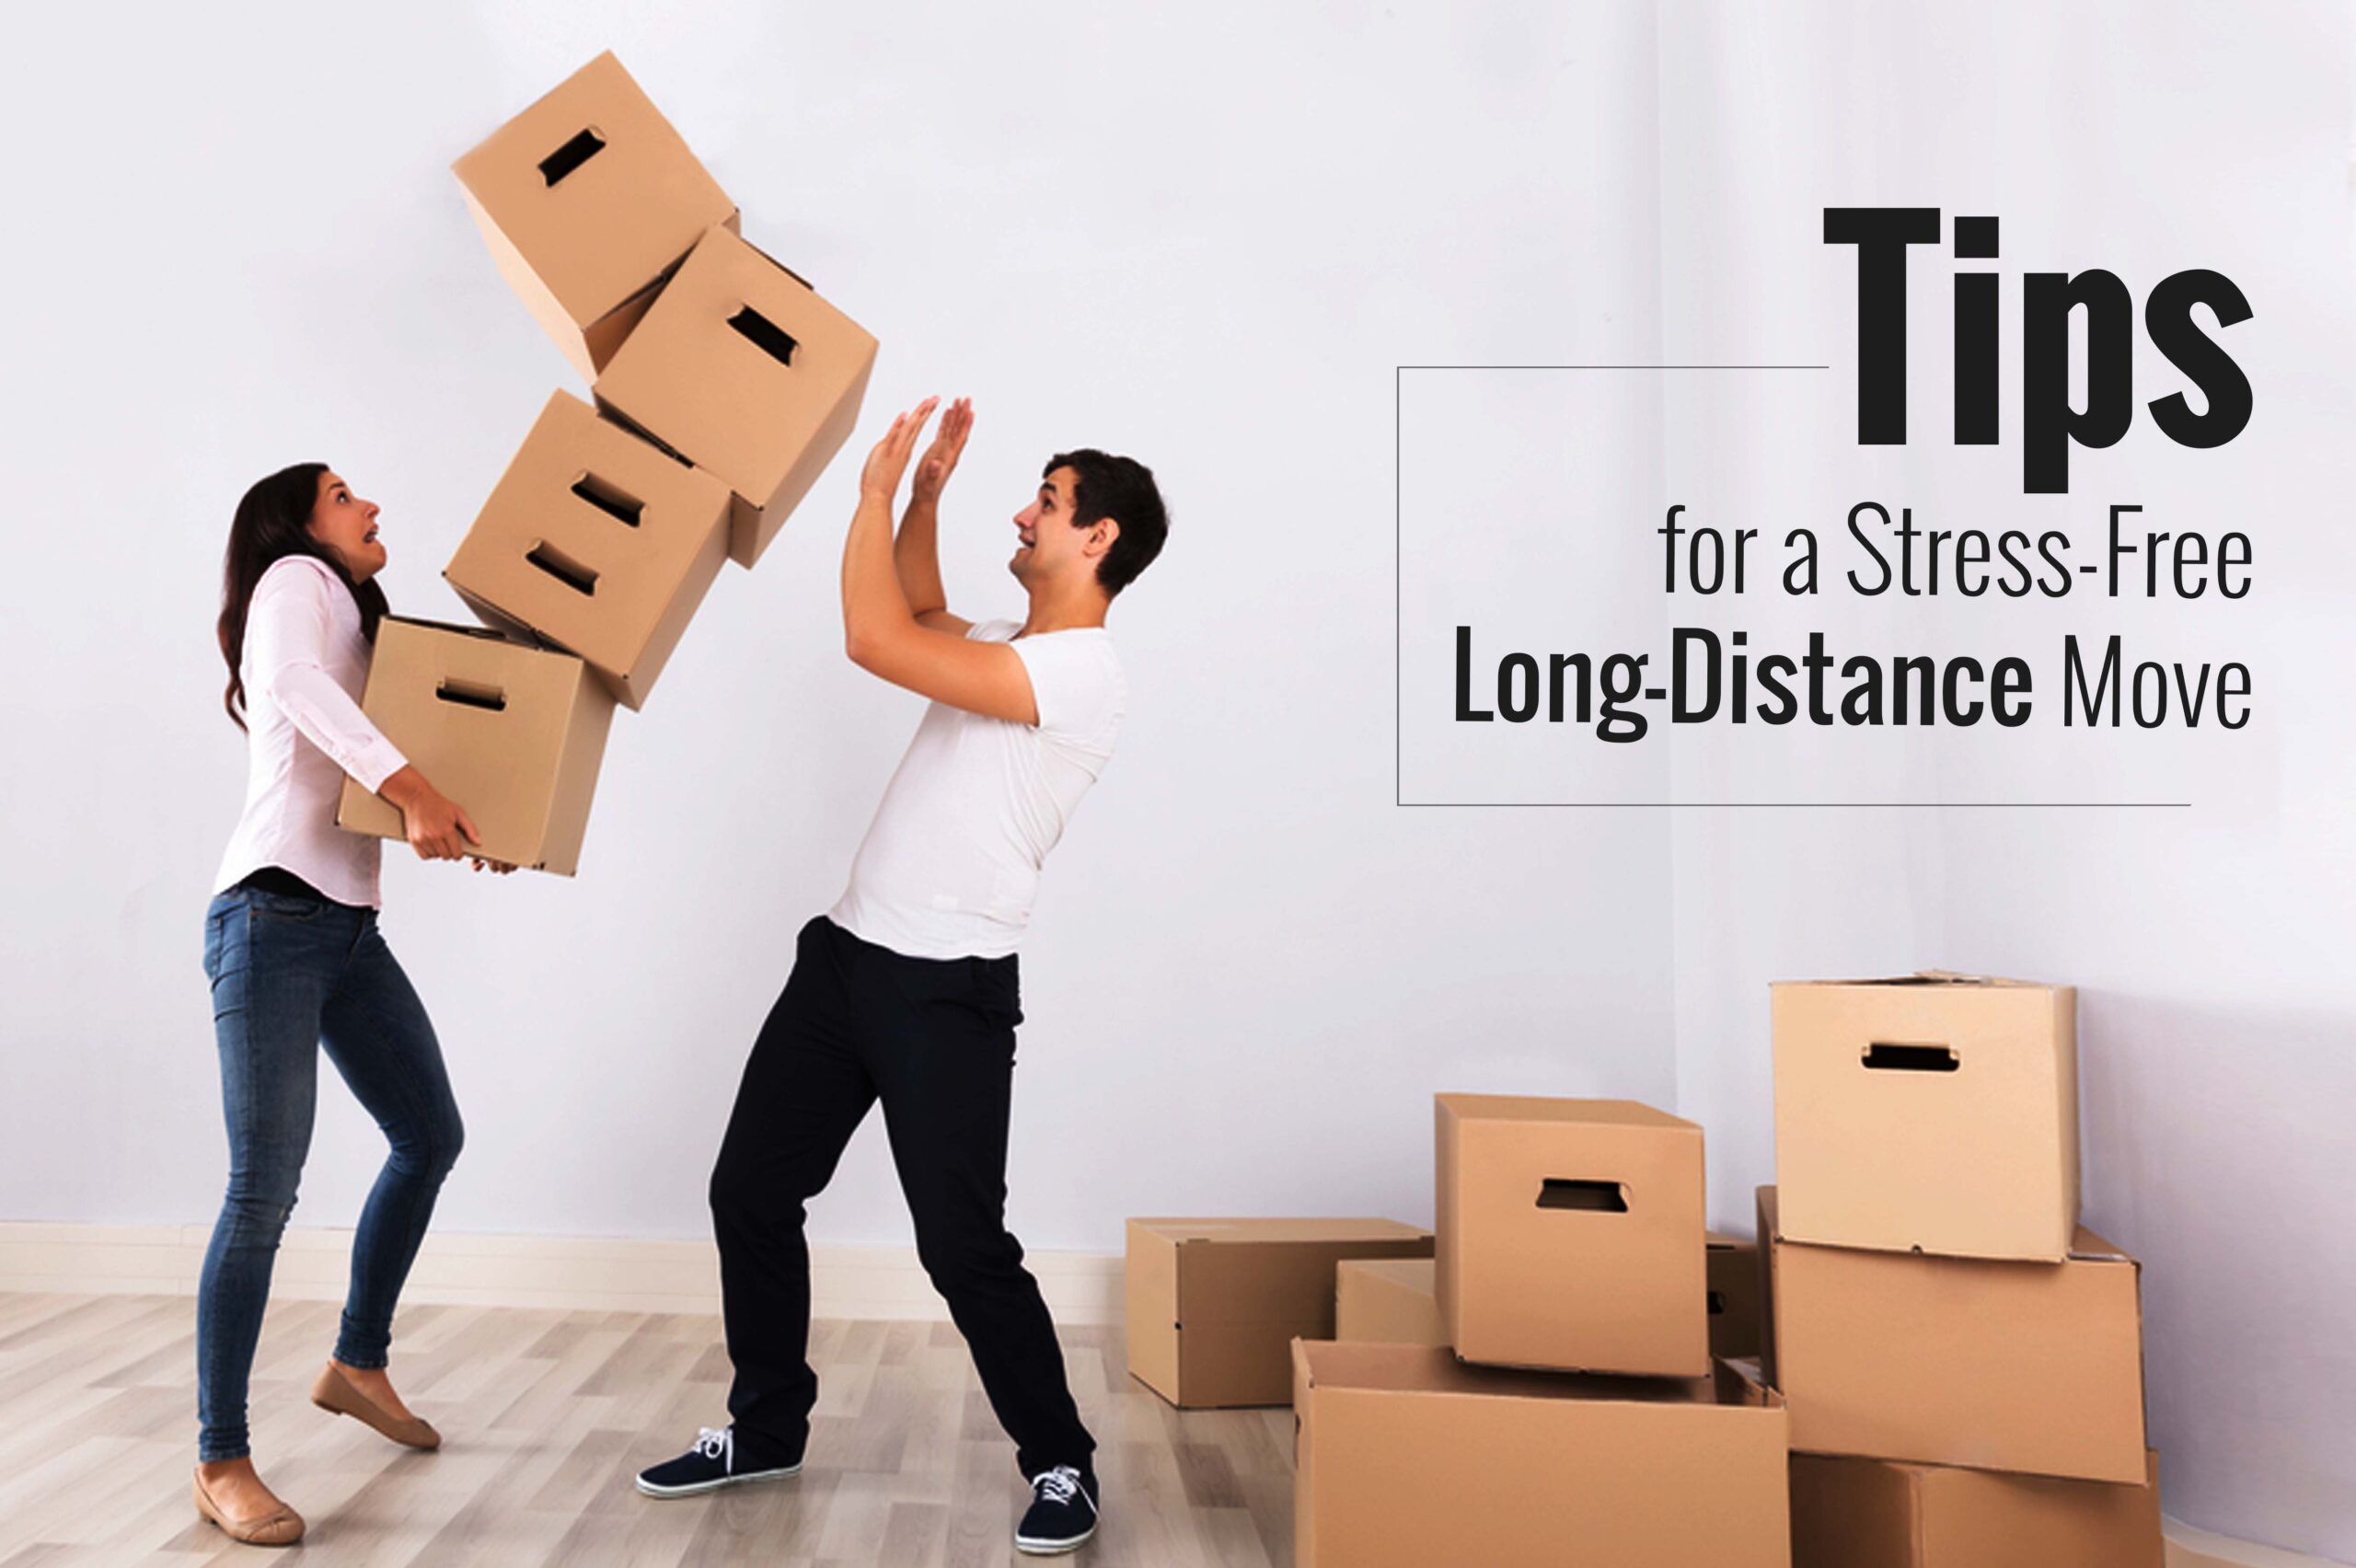 Tips for a Stress-Free Long-Distance Move